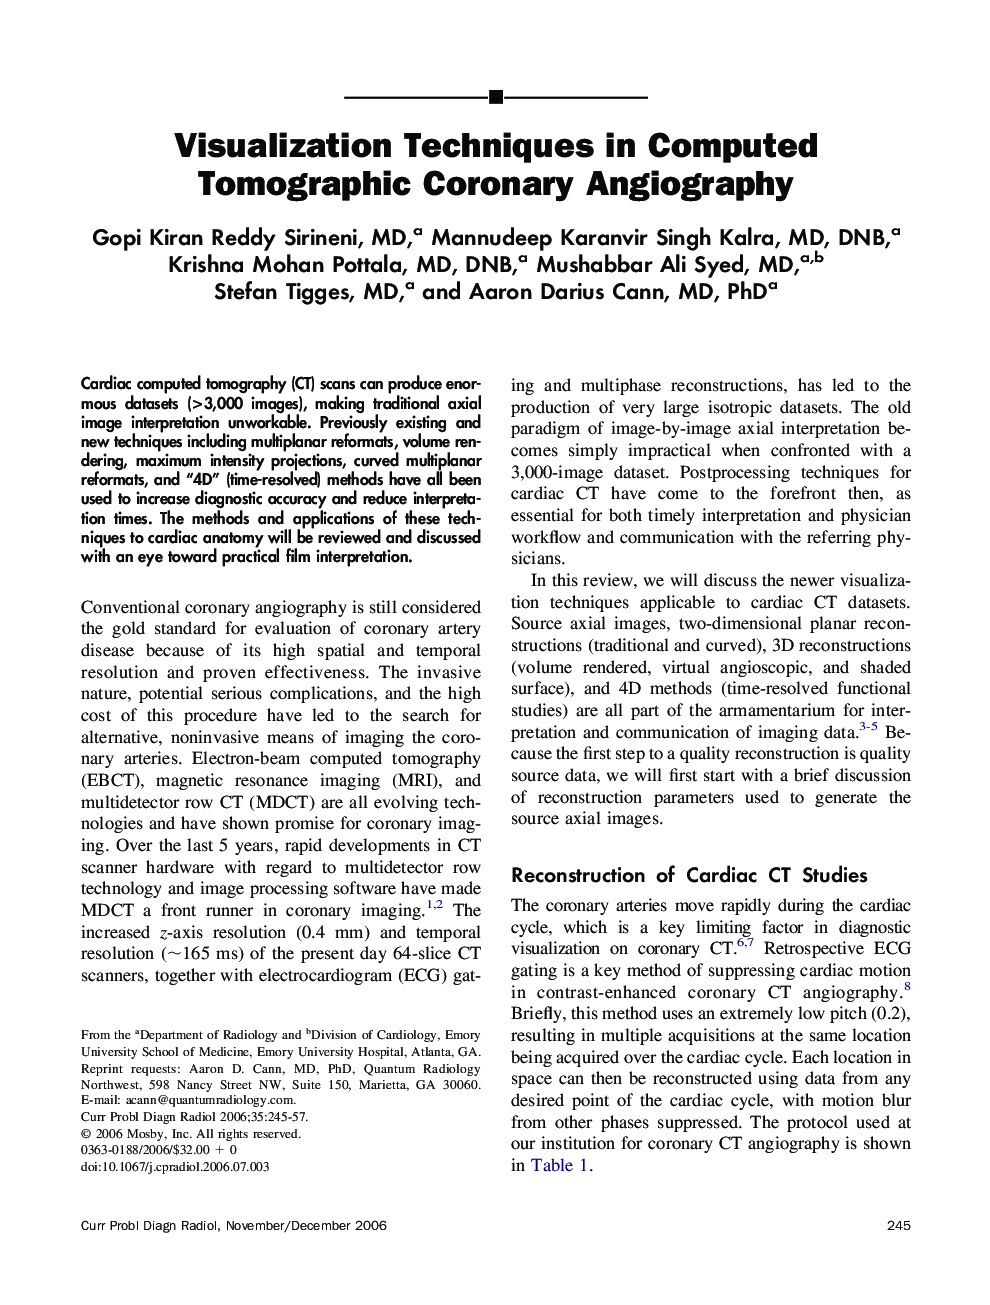 Visualization Techniques in Computed Tomographic Coronary Angiography